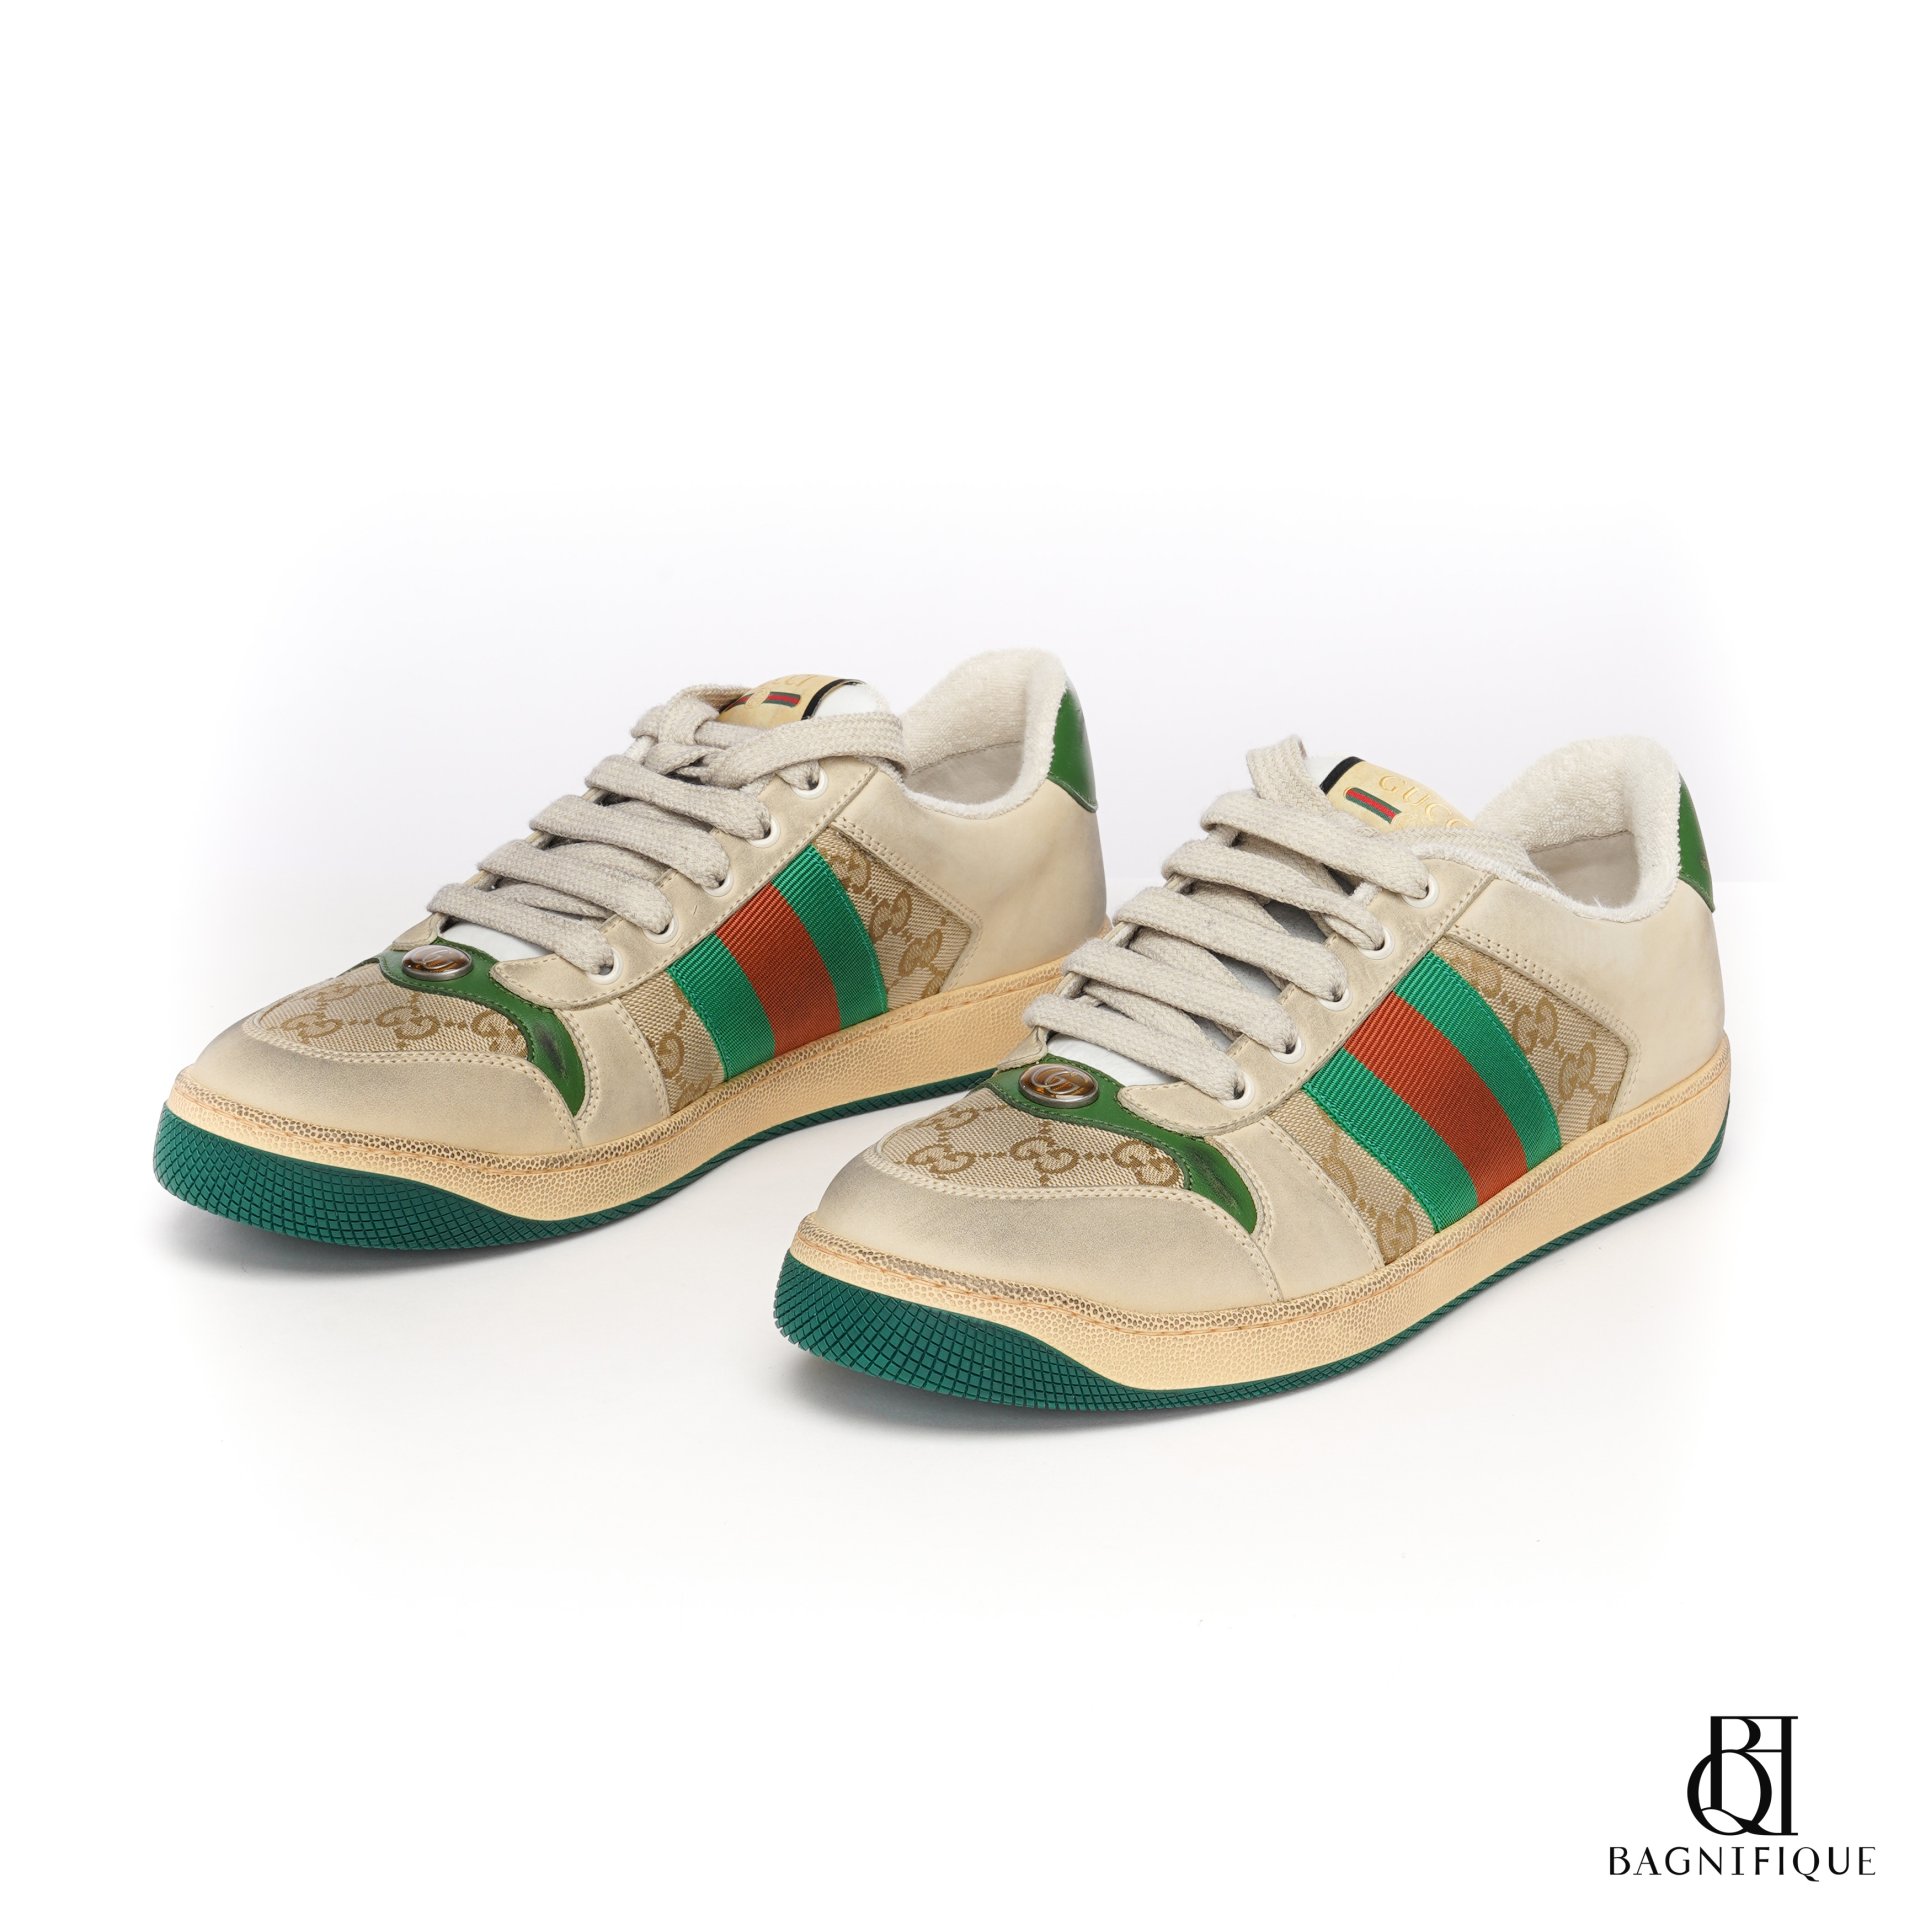 Gucci Leather and Nylon Sneakers - Green